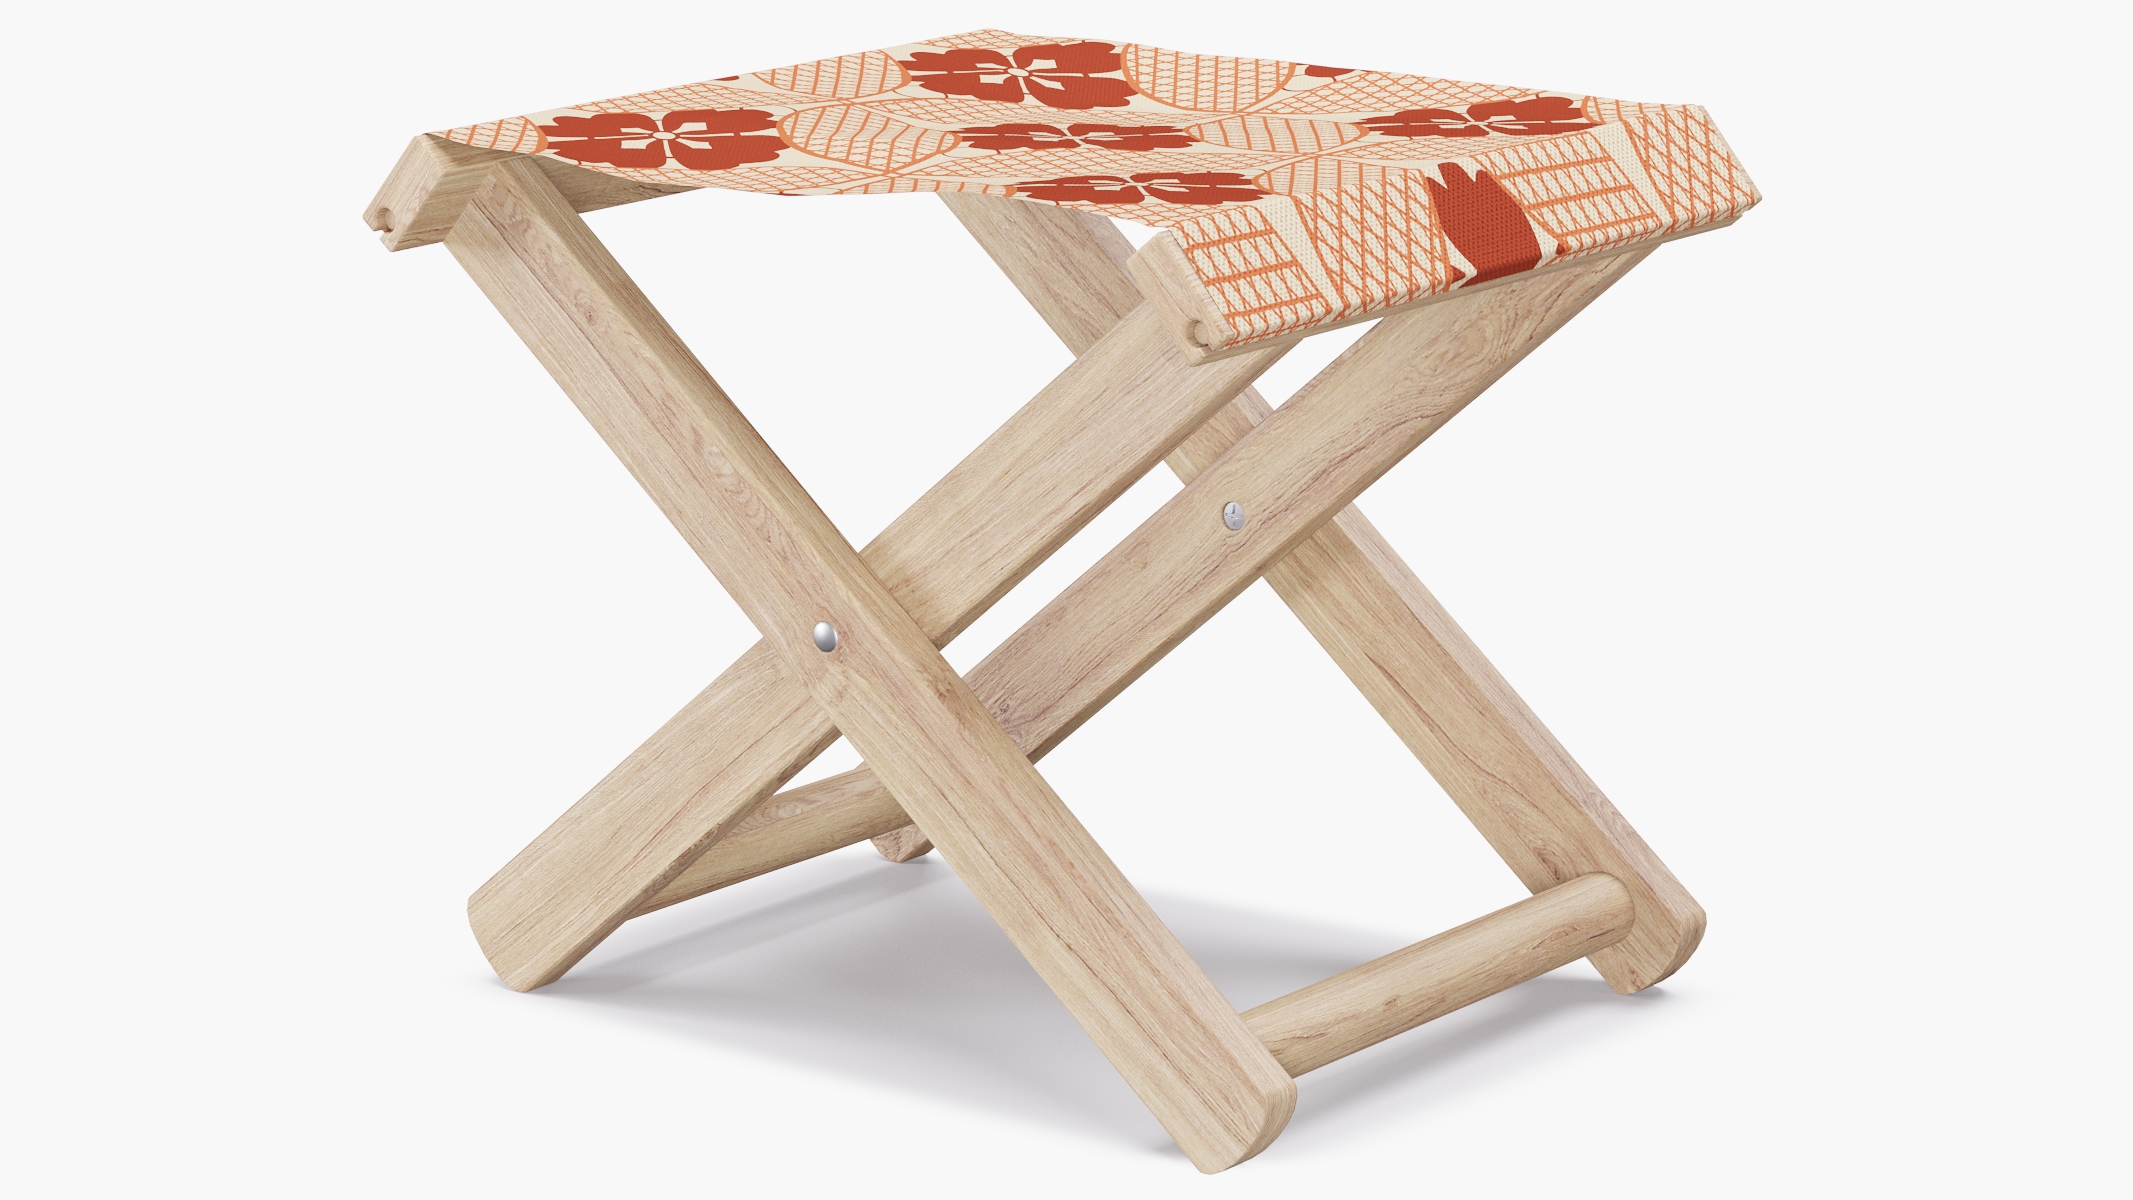 Cabana Stool, Coral Solaire - Image 1